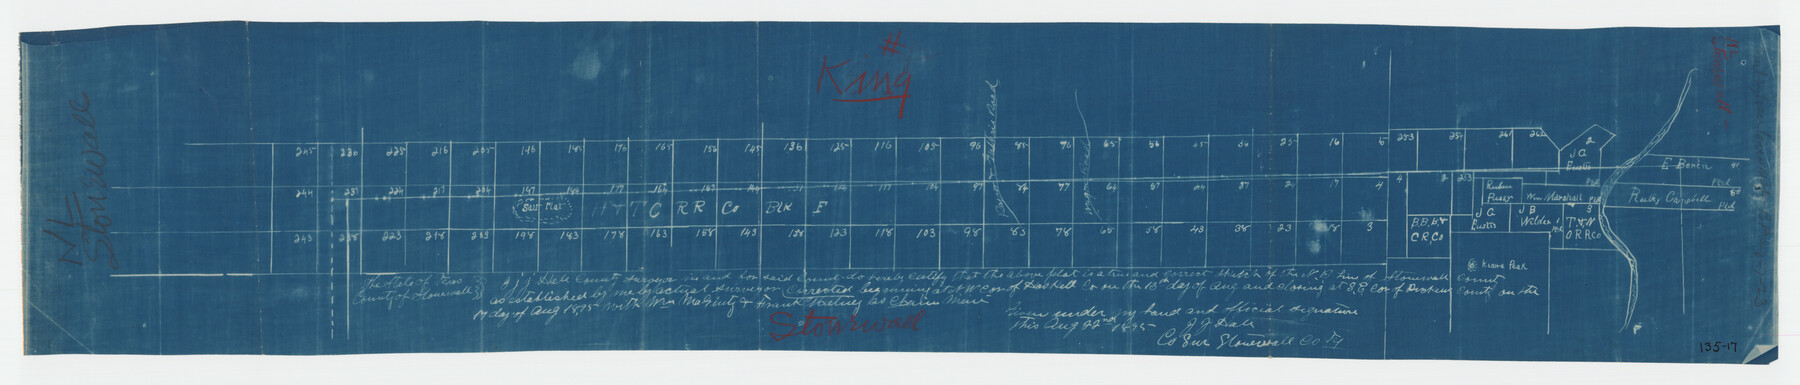 90979, [King/Stonewall County Line], Twichell Survey Records